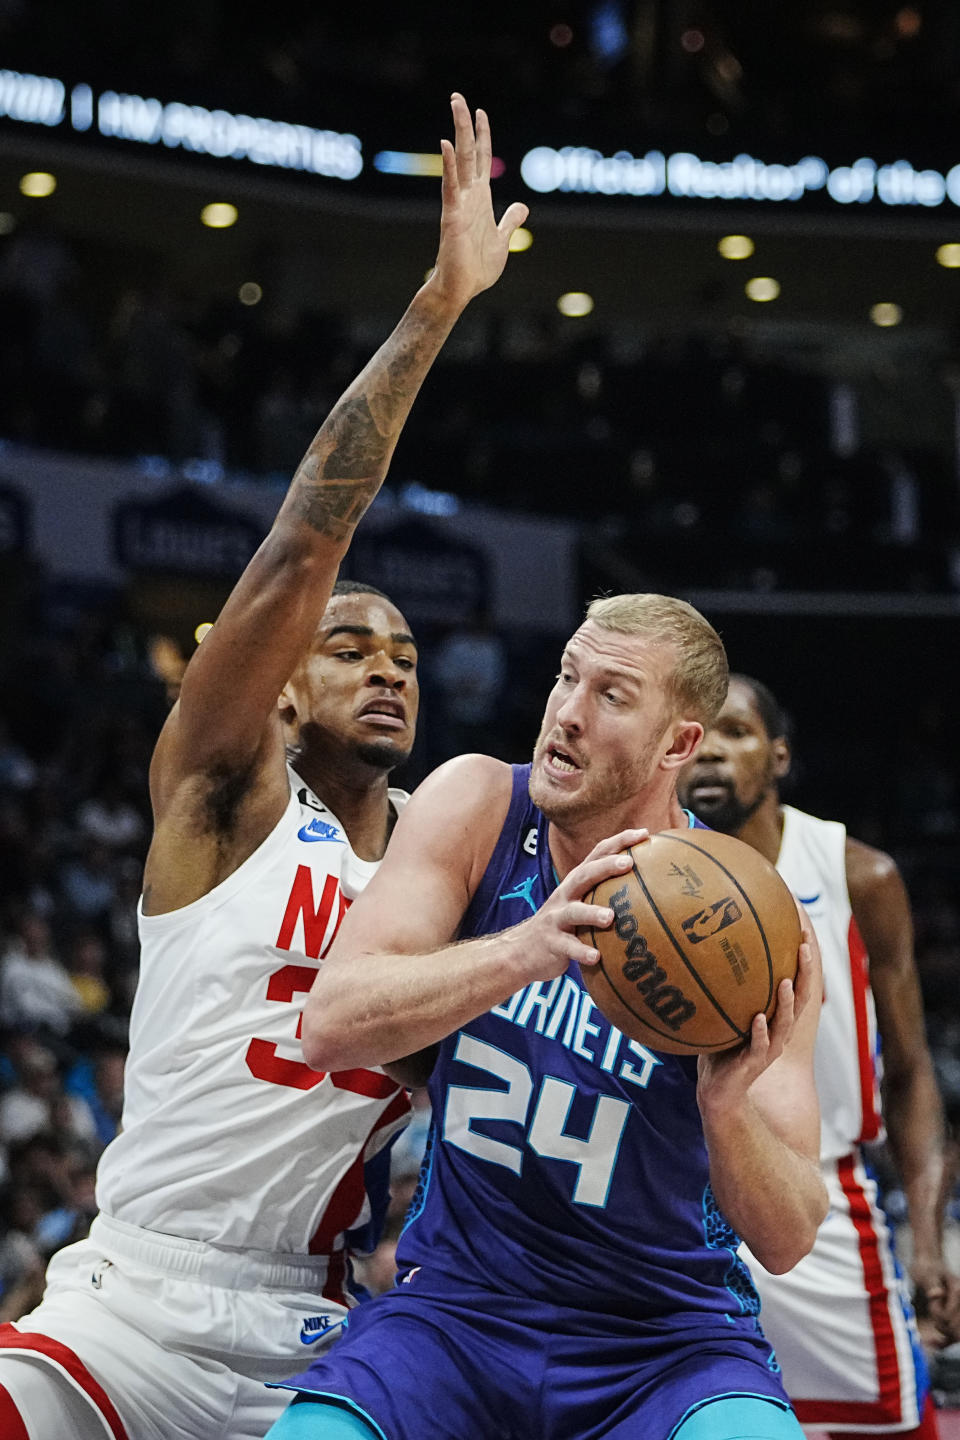 Charlotte Hornets center Mason Plumlee (24) works into the lane against Brooklyn Nets forward Nic Claxton, left, during the first half of an NBA basketball game, Saturday, Nov. 5, 2022, in Charlotte, N.C. (AP Photo/Rusty Jones)